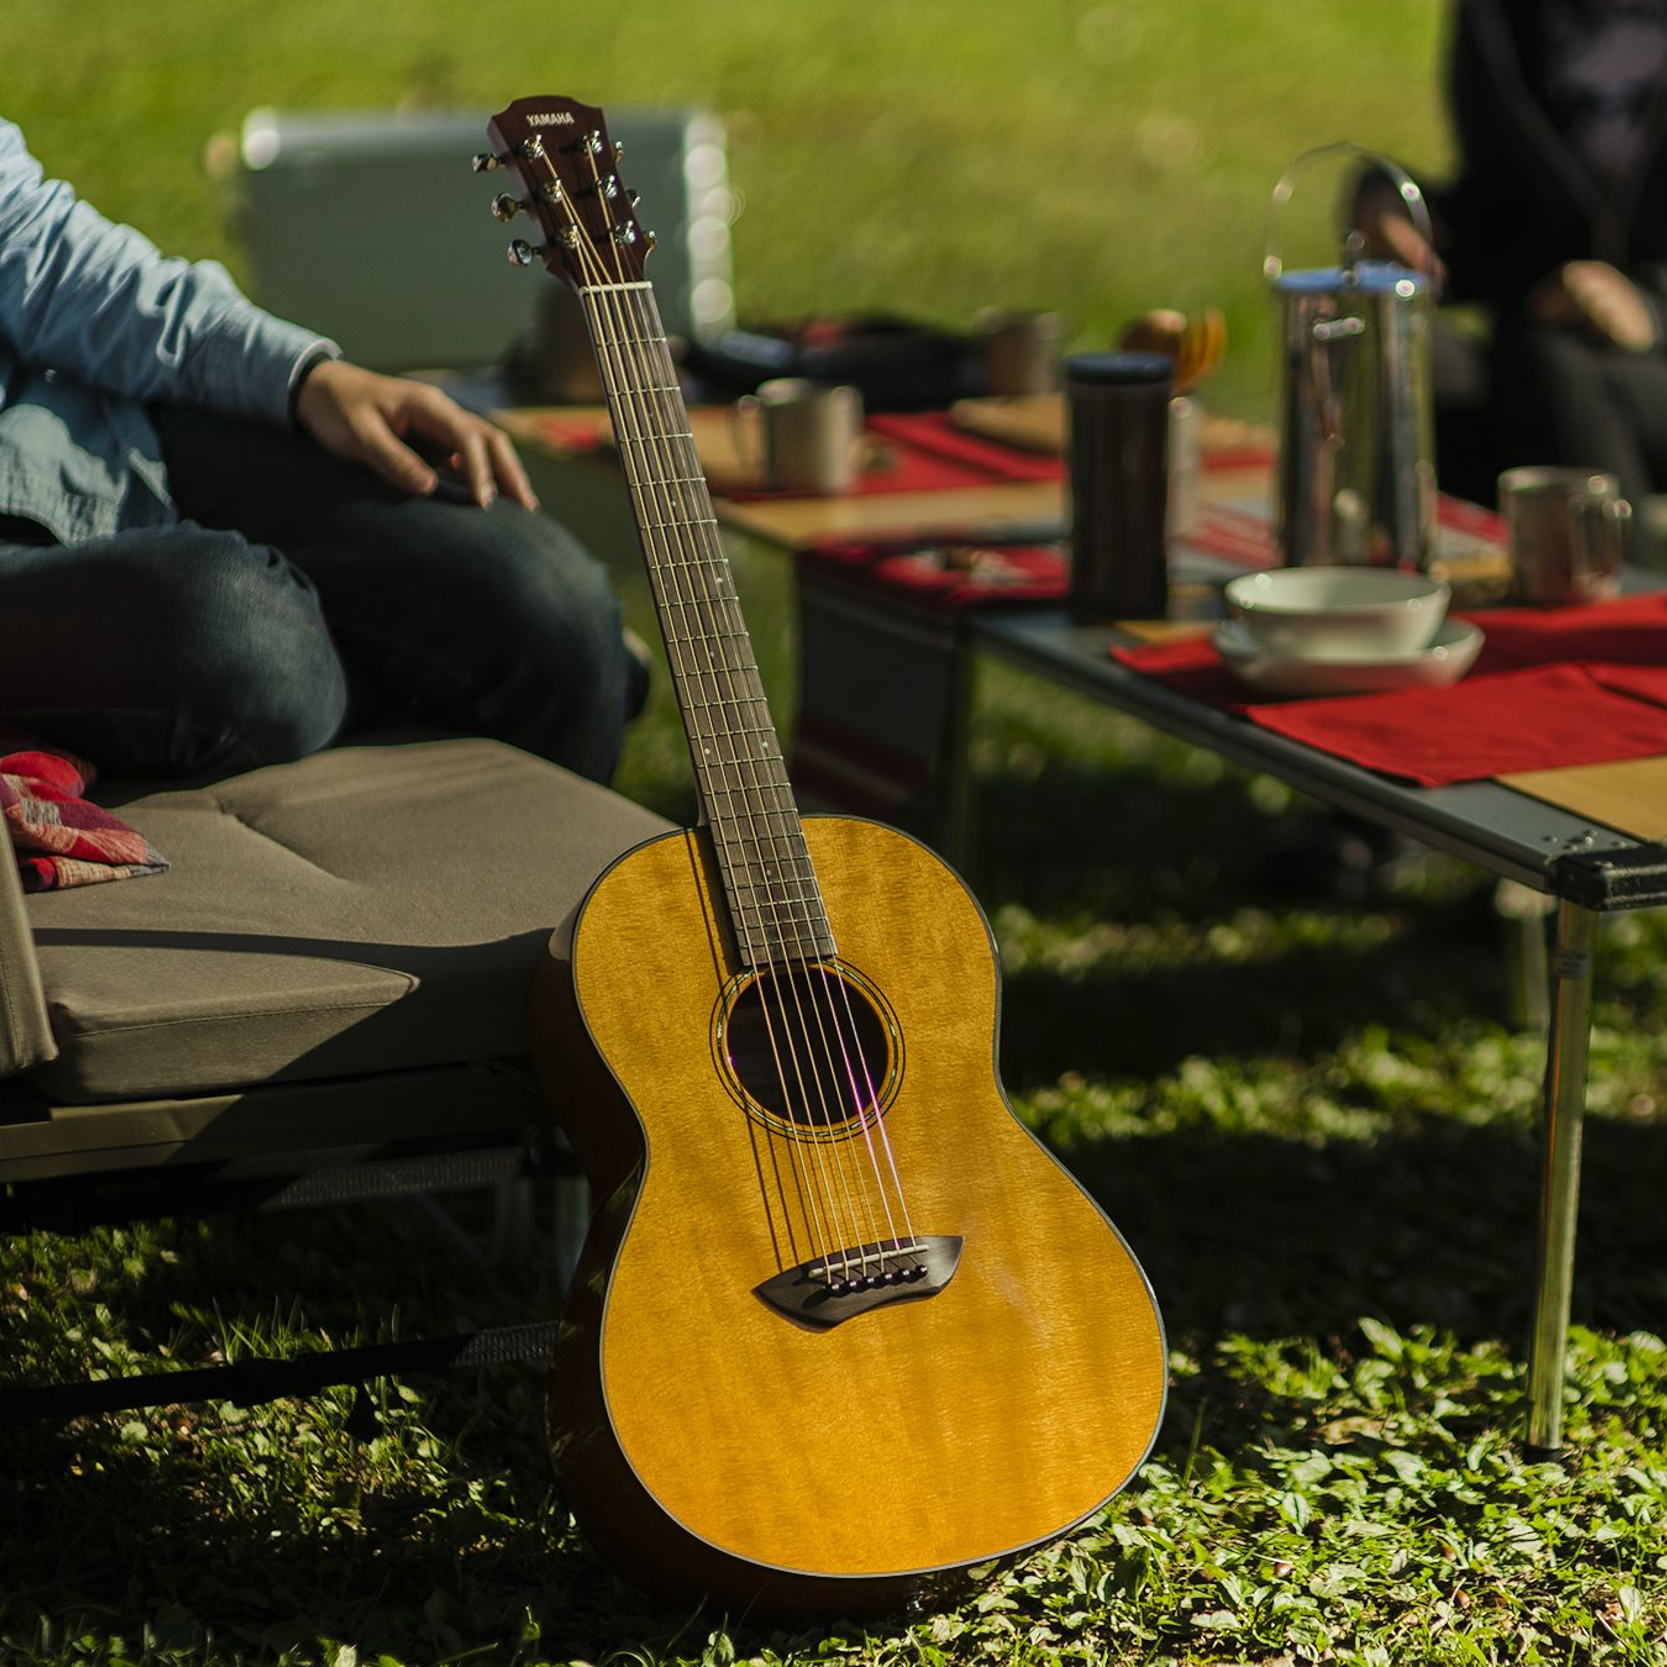 Guitar propped against a chair in an outdoor setting.